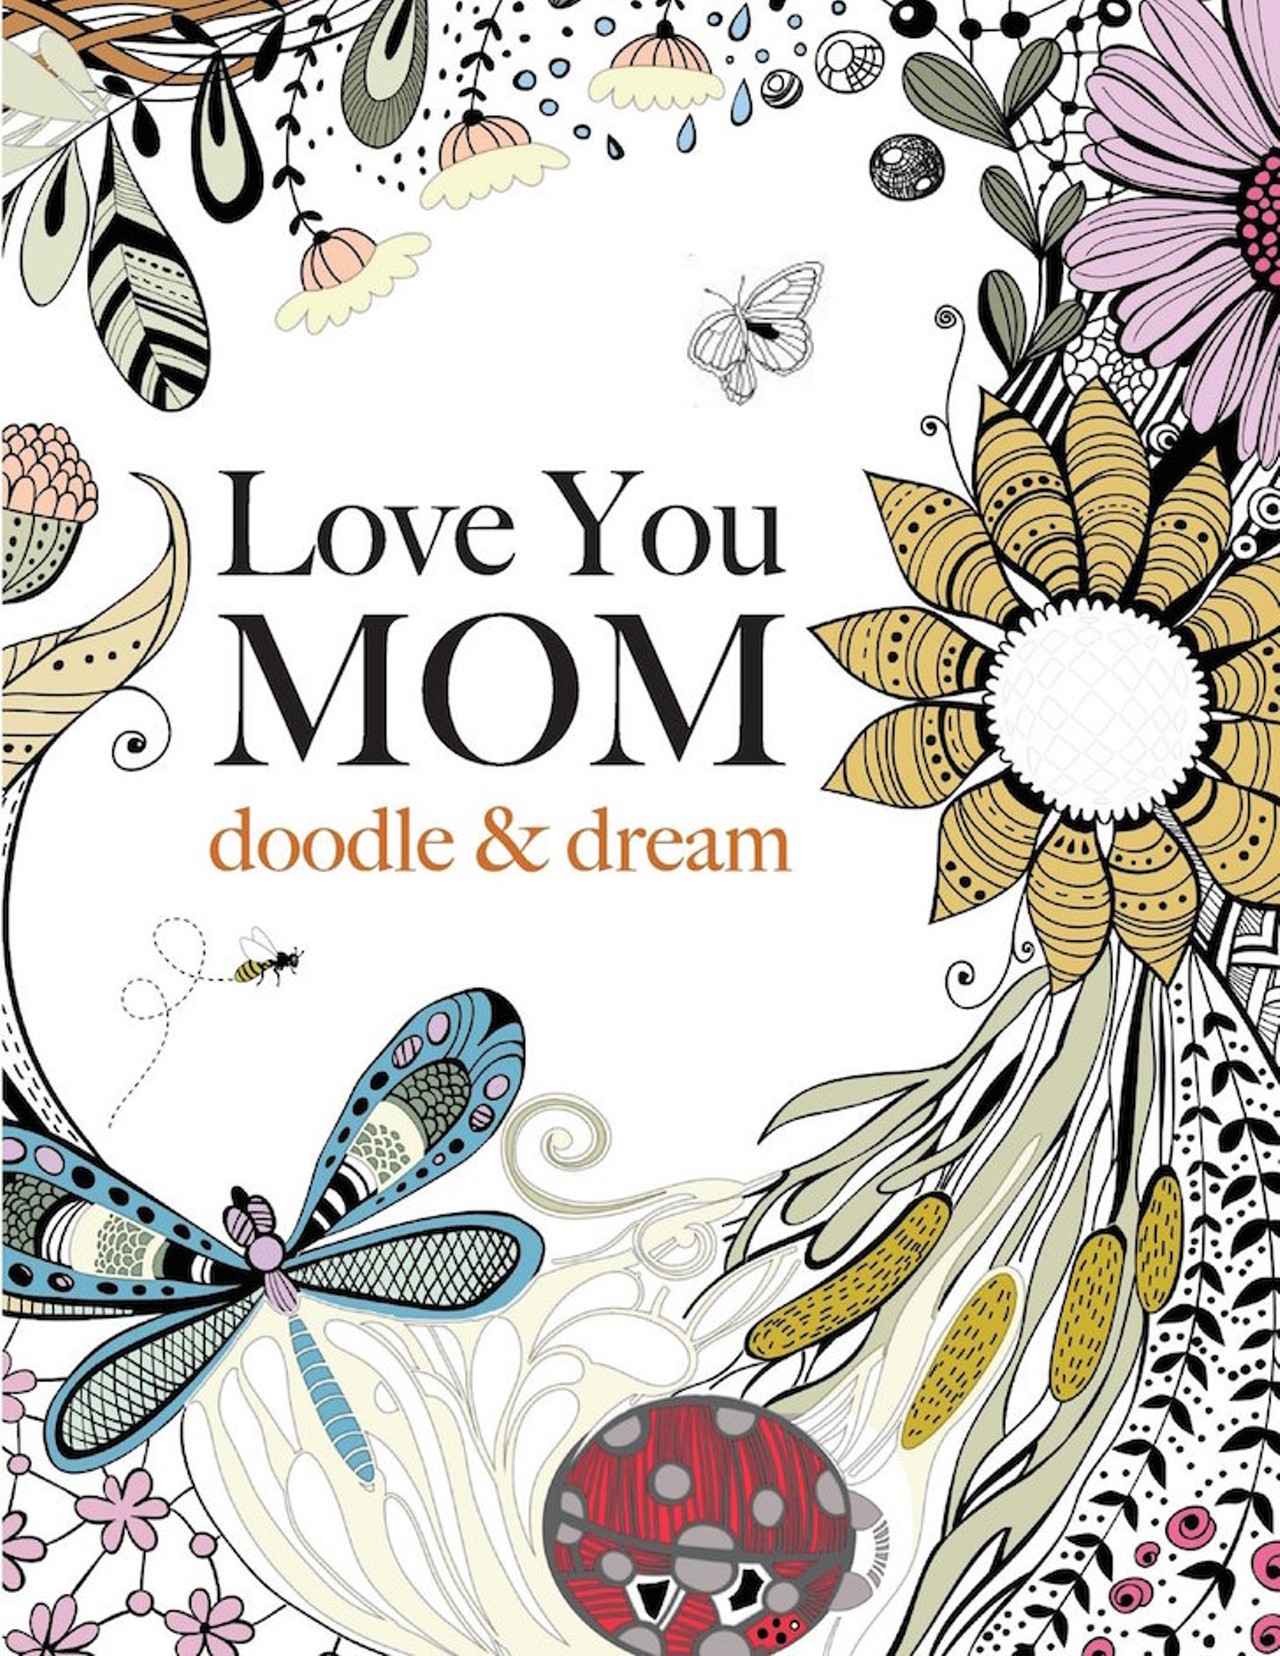  Love You MOM: doodle & dream 
Just make sure you don&#146;t get this one confused with the previous slide. 
Buy it at amazon.com 